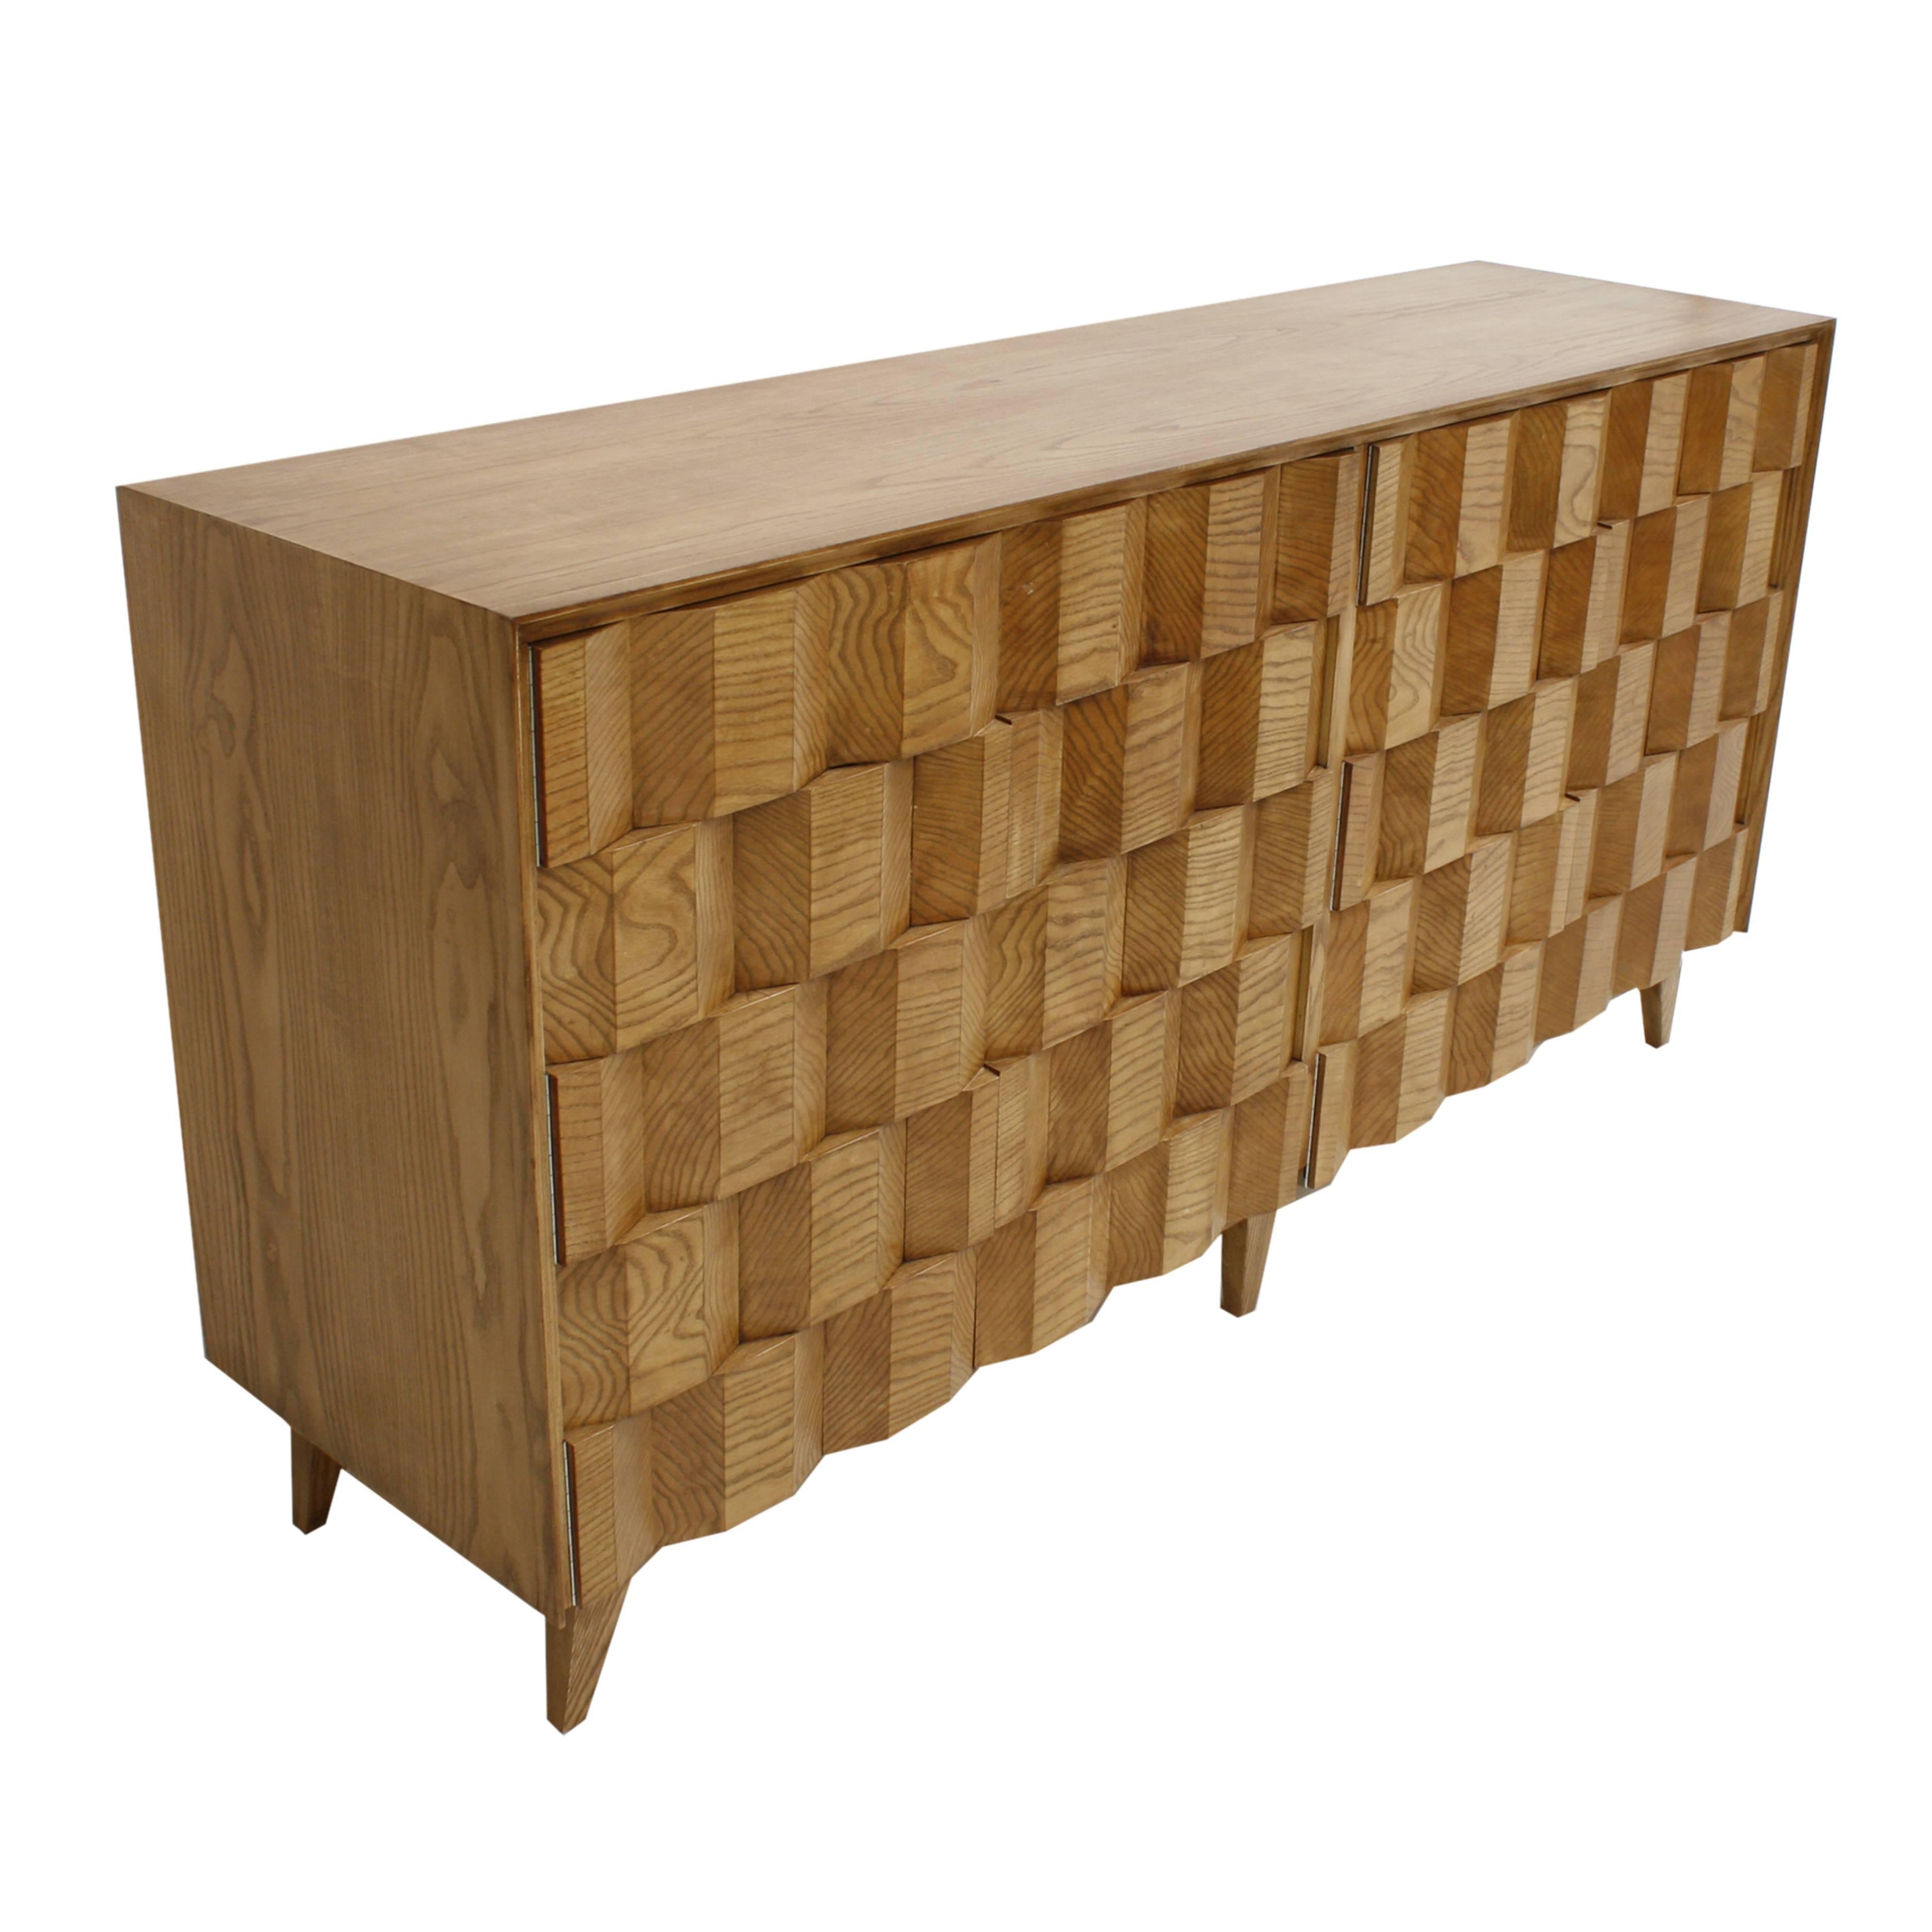 Hand-Crafted Mid-Century Modern Style Oakwood Italian Sideboard Designed by L. A. Studio